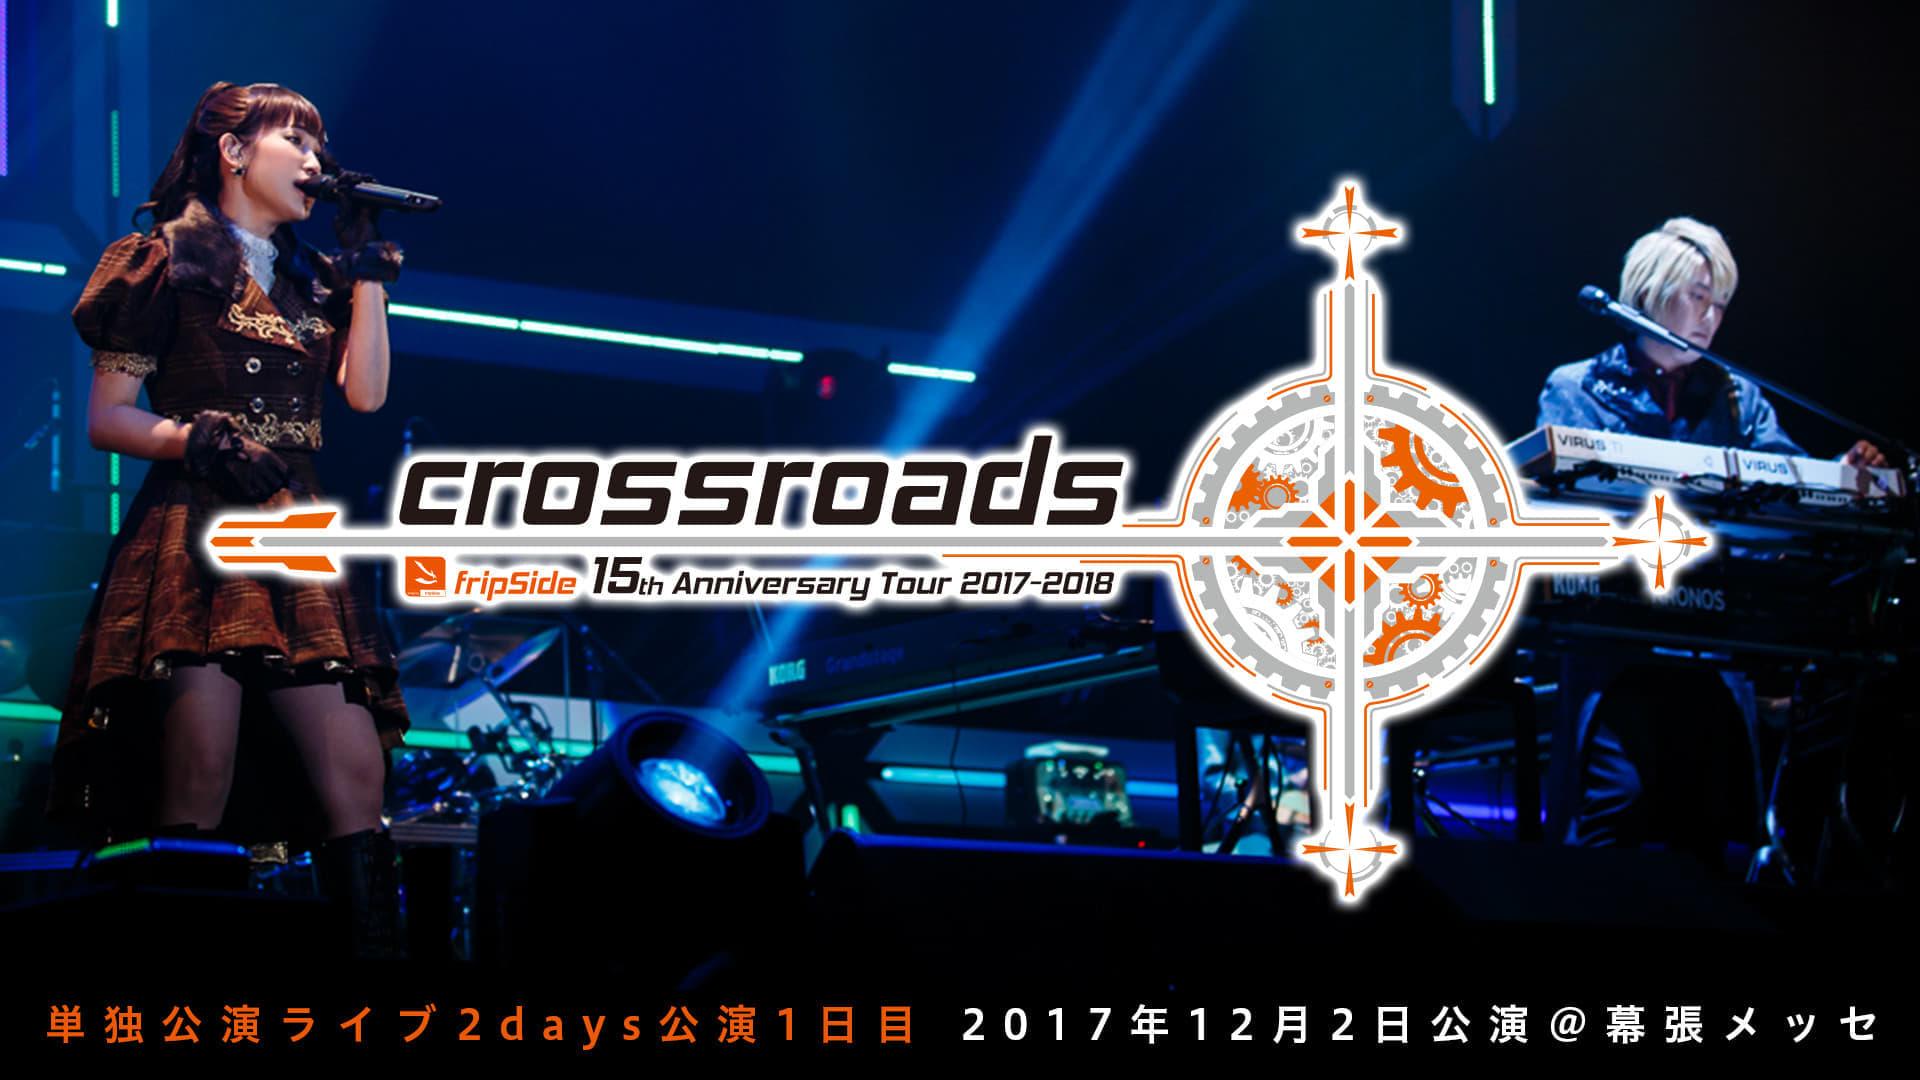 fripSide 15th Anniversary Tour 2017-2018 “crossroads” Day 2 backdrop